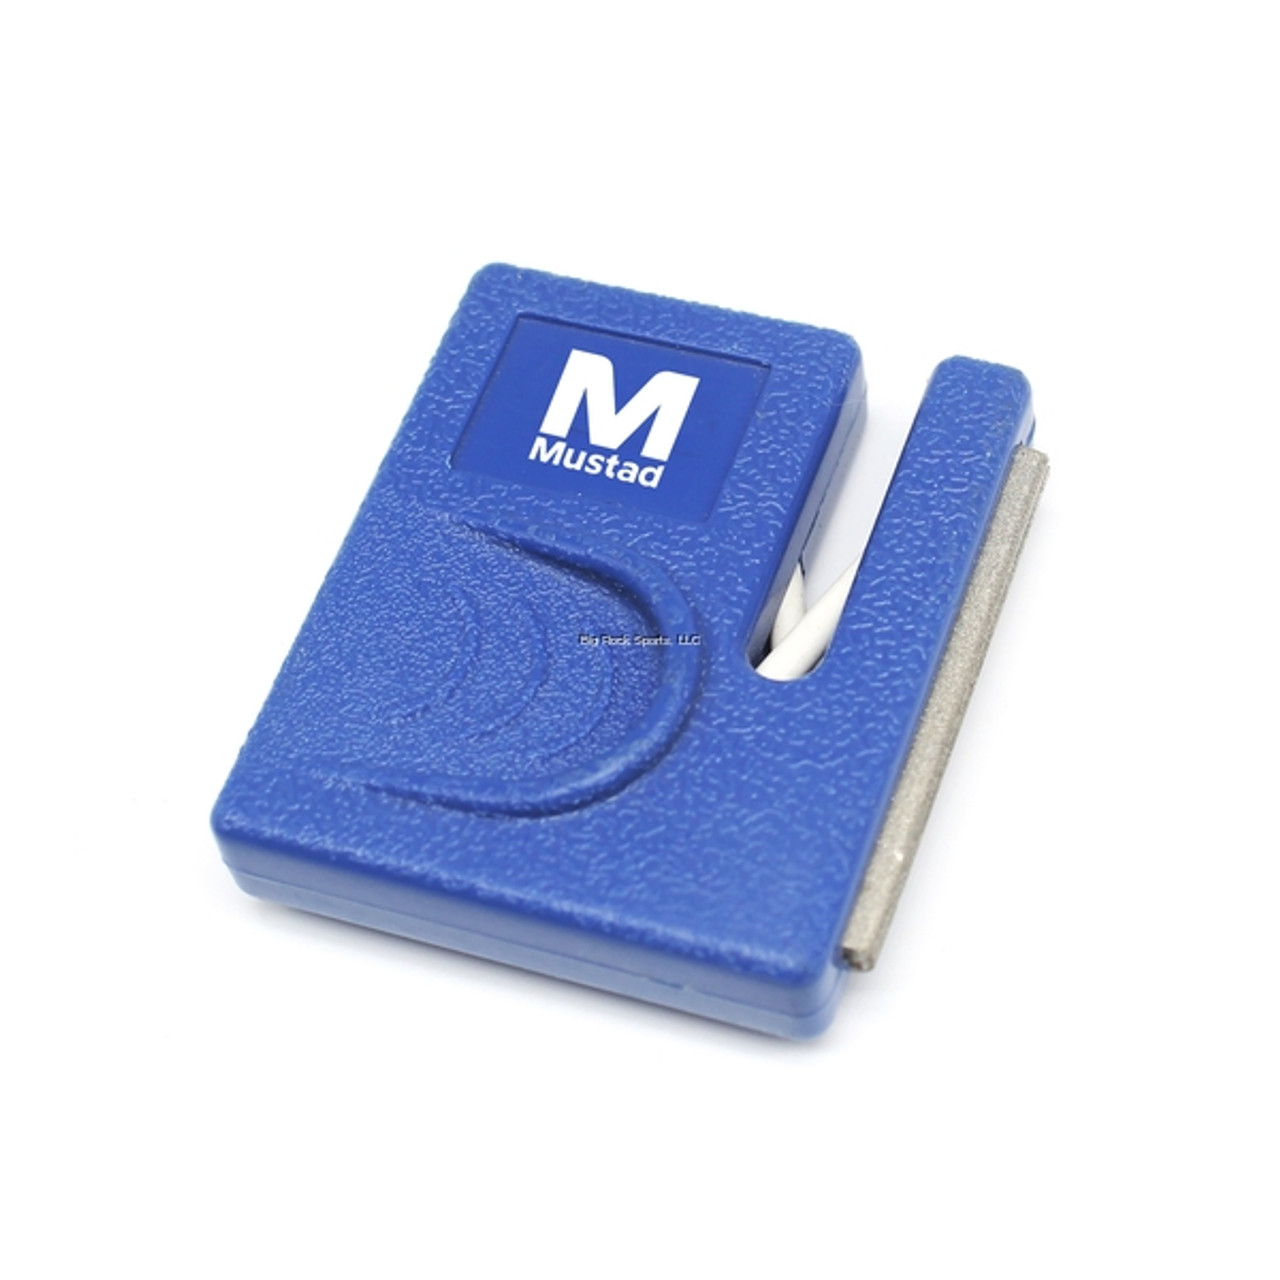 Mustad MTB012 Knife Sharpener Eco
 
     
 
Mustad's Knife Sharpener comes with a hook sharpener on the side, so you can be ready to fillet a fresh catch, and get ready for the next bite.
Product Details:
Vendor: Mustad
SKU: MTB012